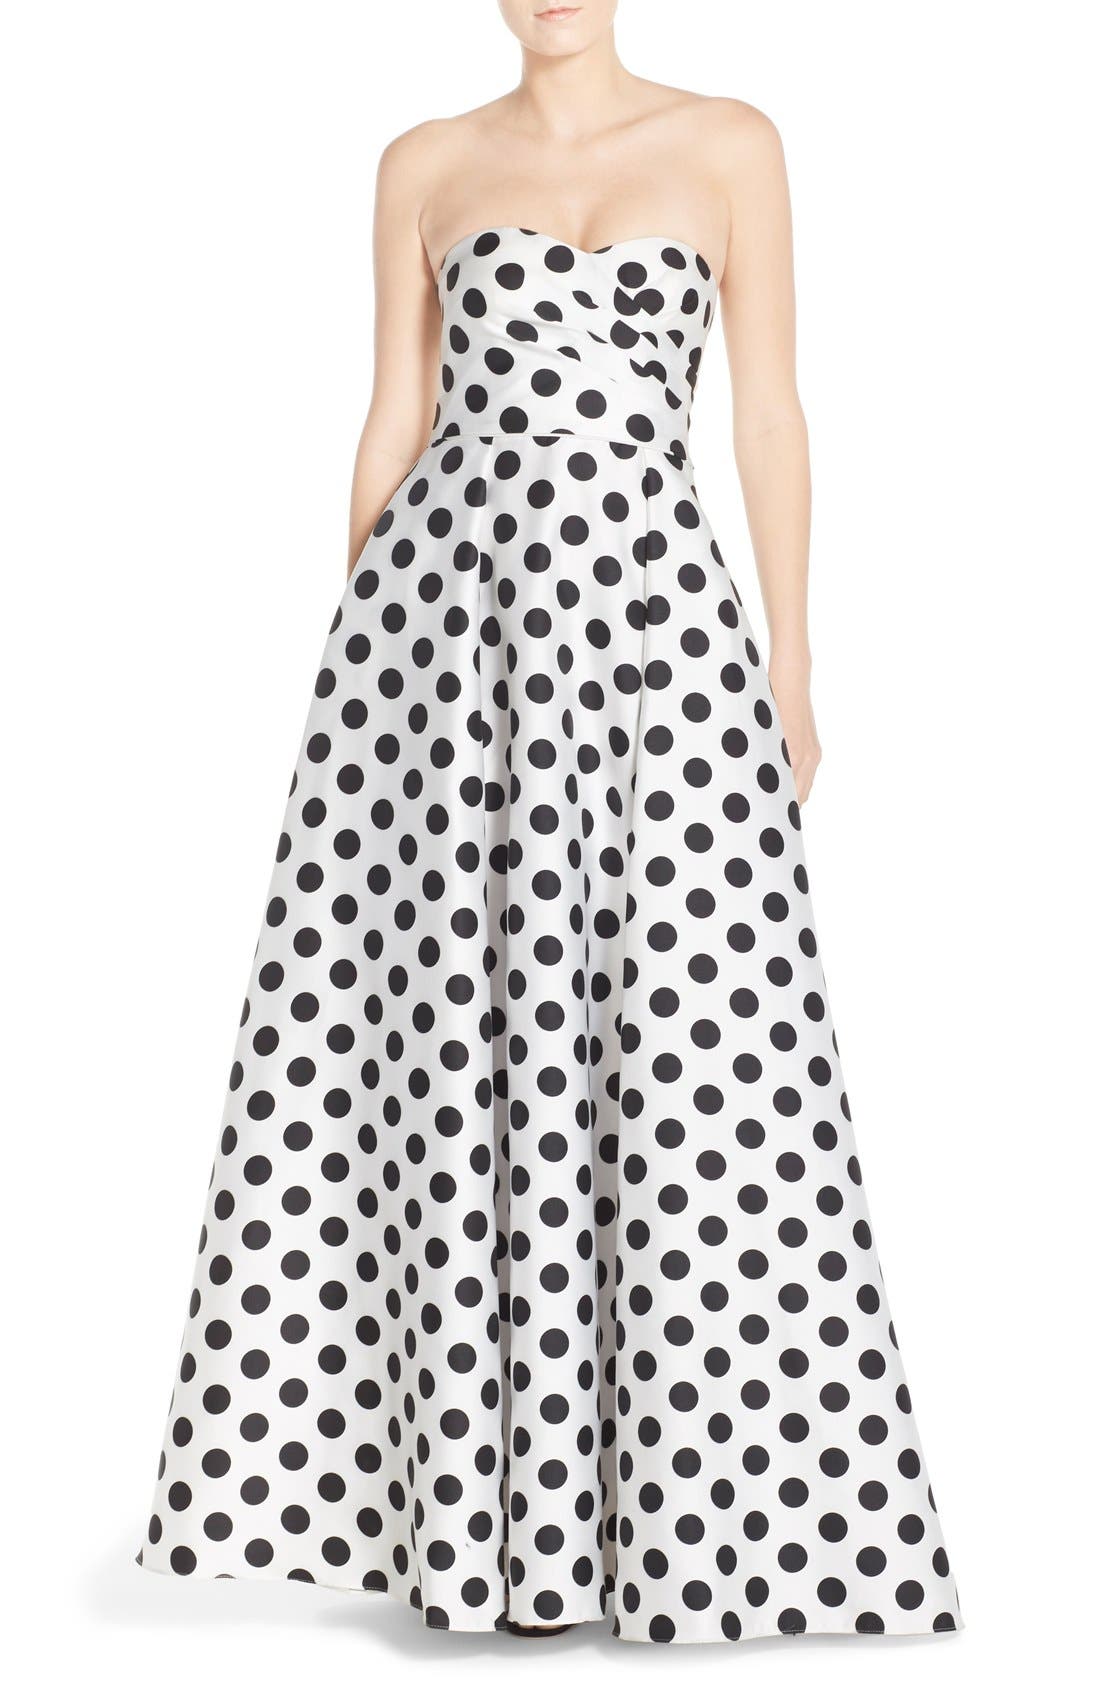 adrianna papell polka dot bodice gown